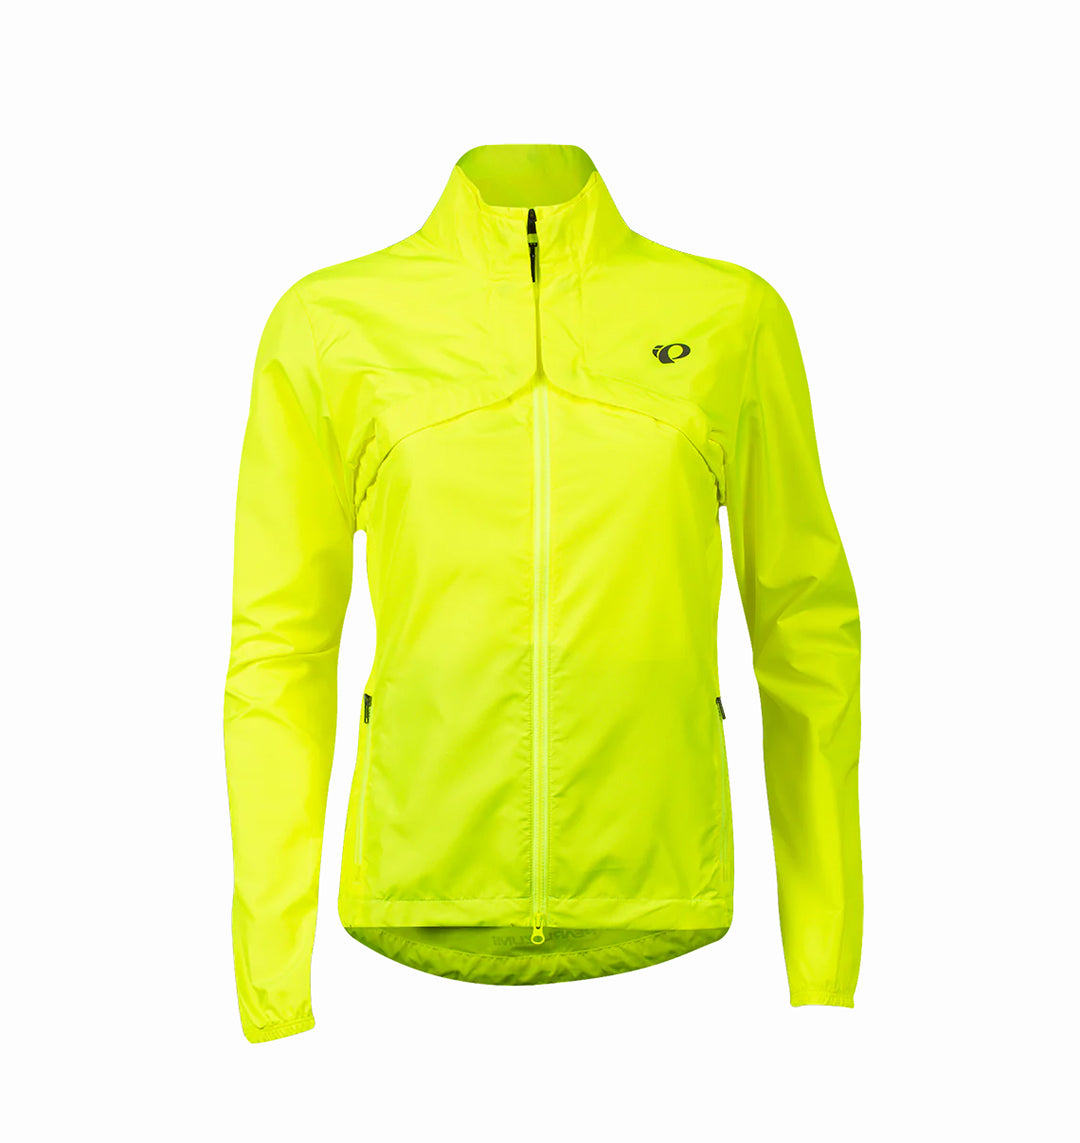  PEARL IZUMI Quest Barrier Jacket Screaming Yellow MD